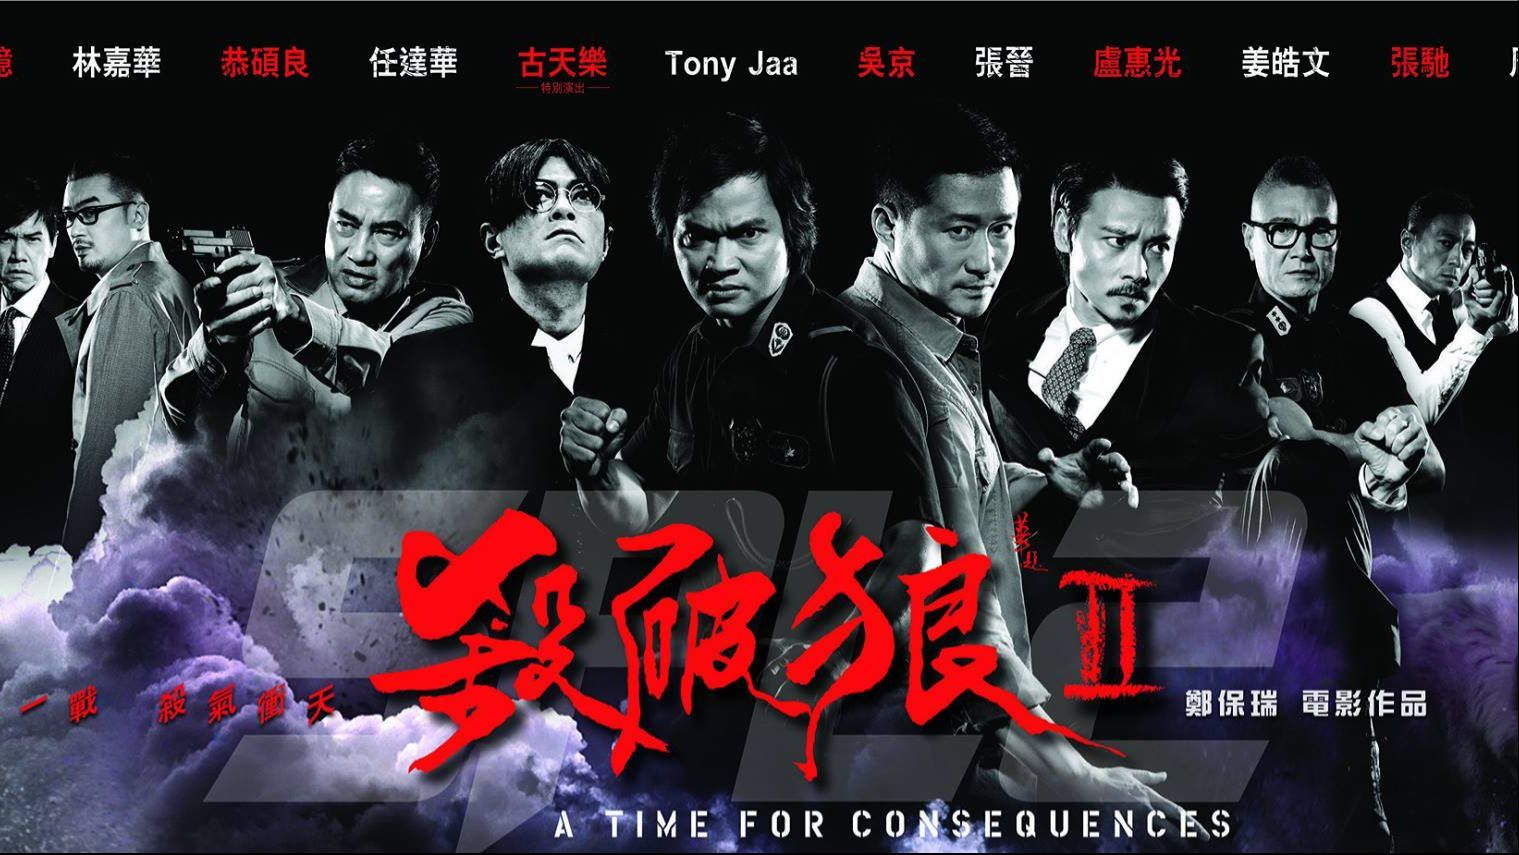 SPL 2: A Time for Consequences streaming online